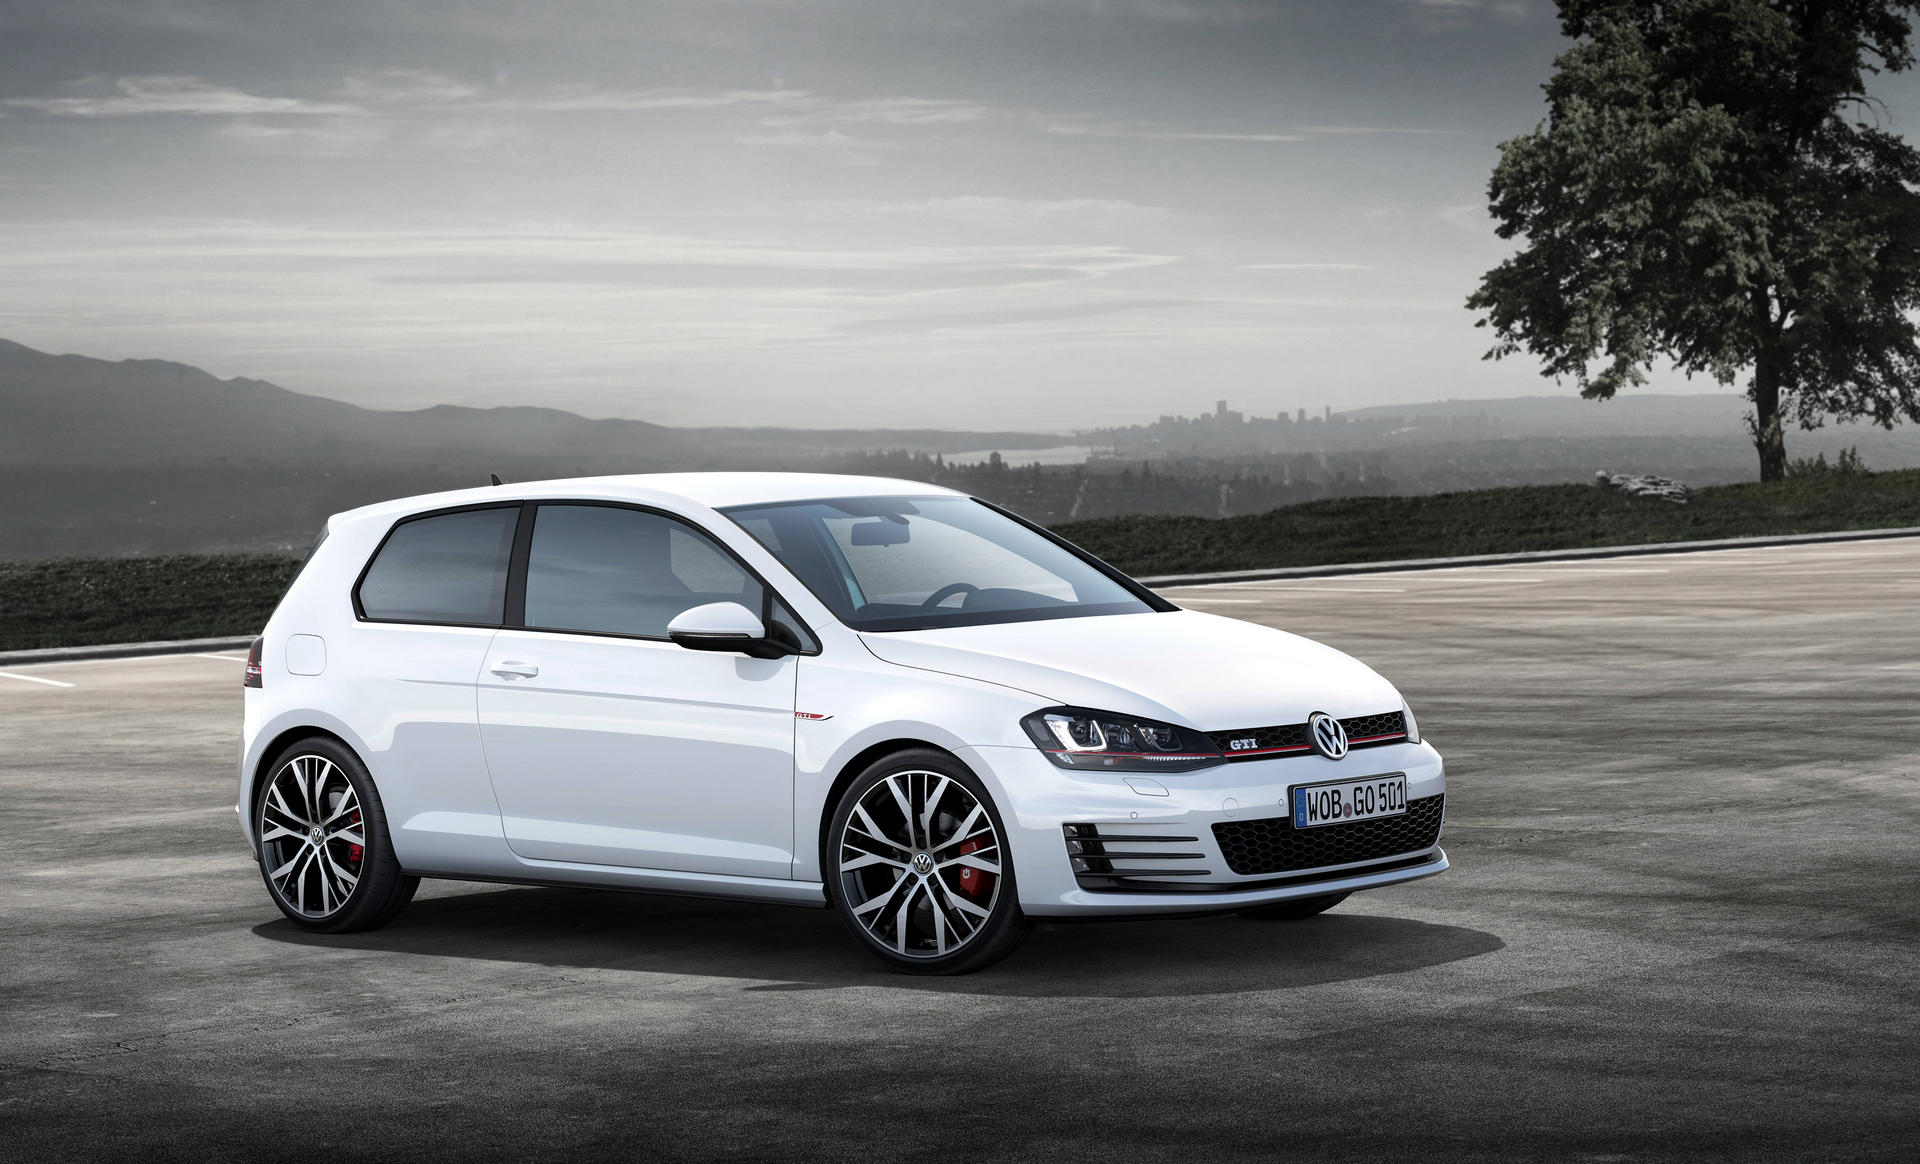 Volkswagen's new Golf GTI has all the poke and practicality you need for Hong Kong's congested roads. Photo: Abdruck fuer Pressezwecke Honora